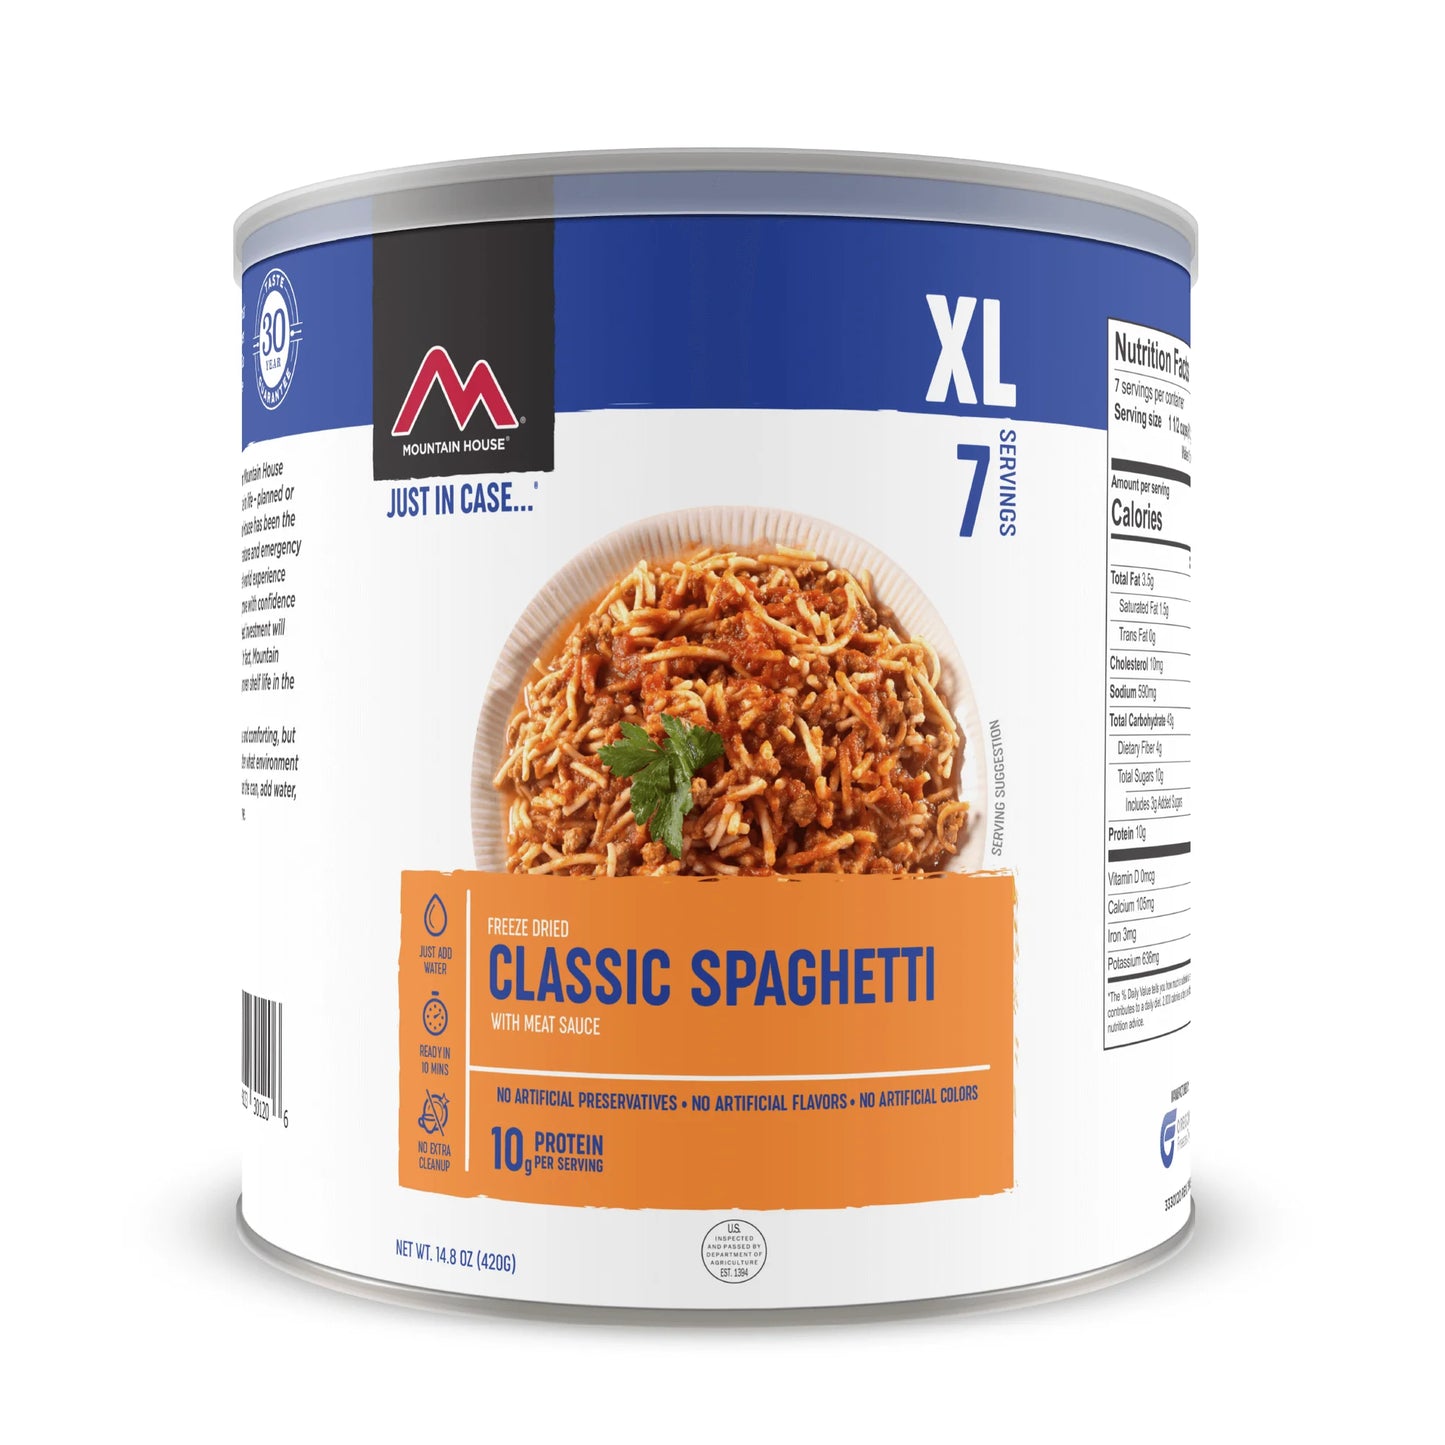 Classic Spaghetti with Meat Sauce (1 can) 7 Serving